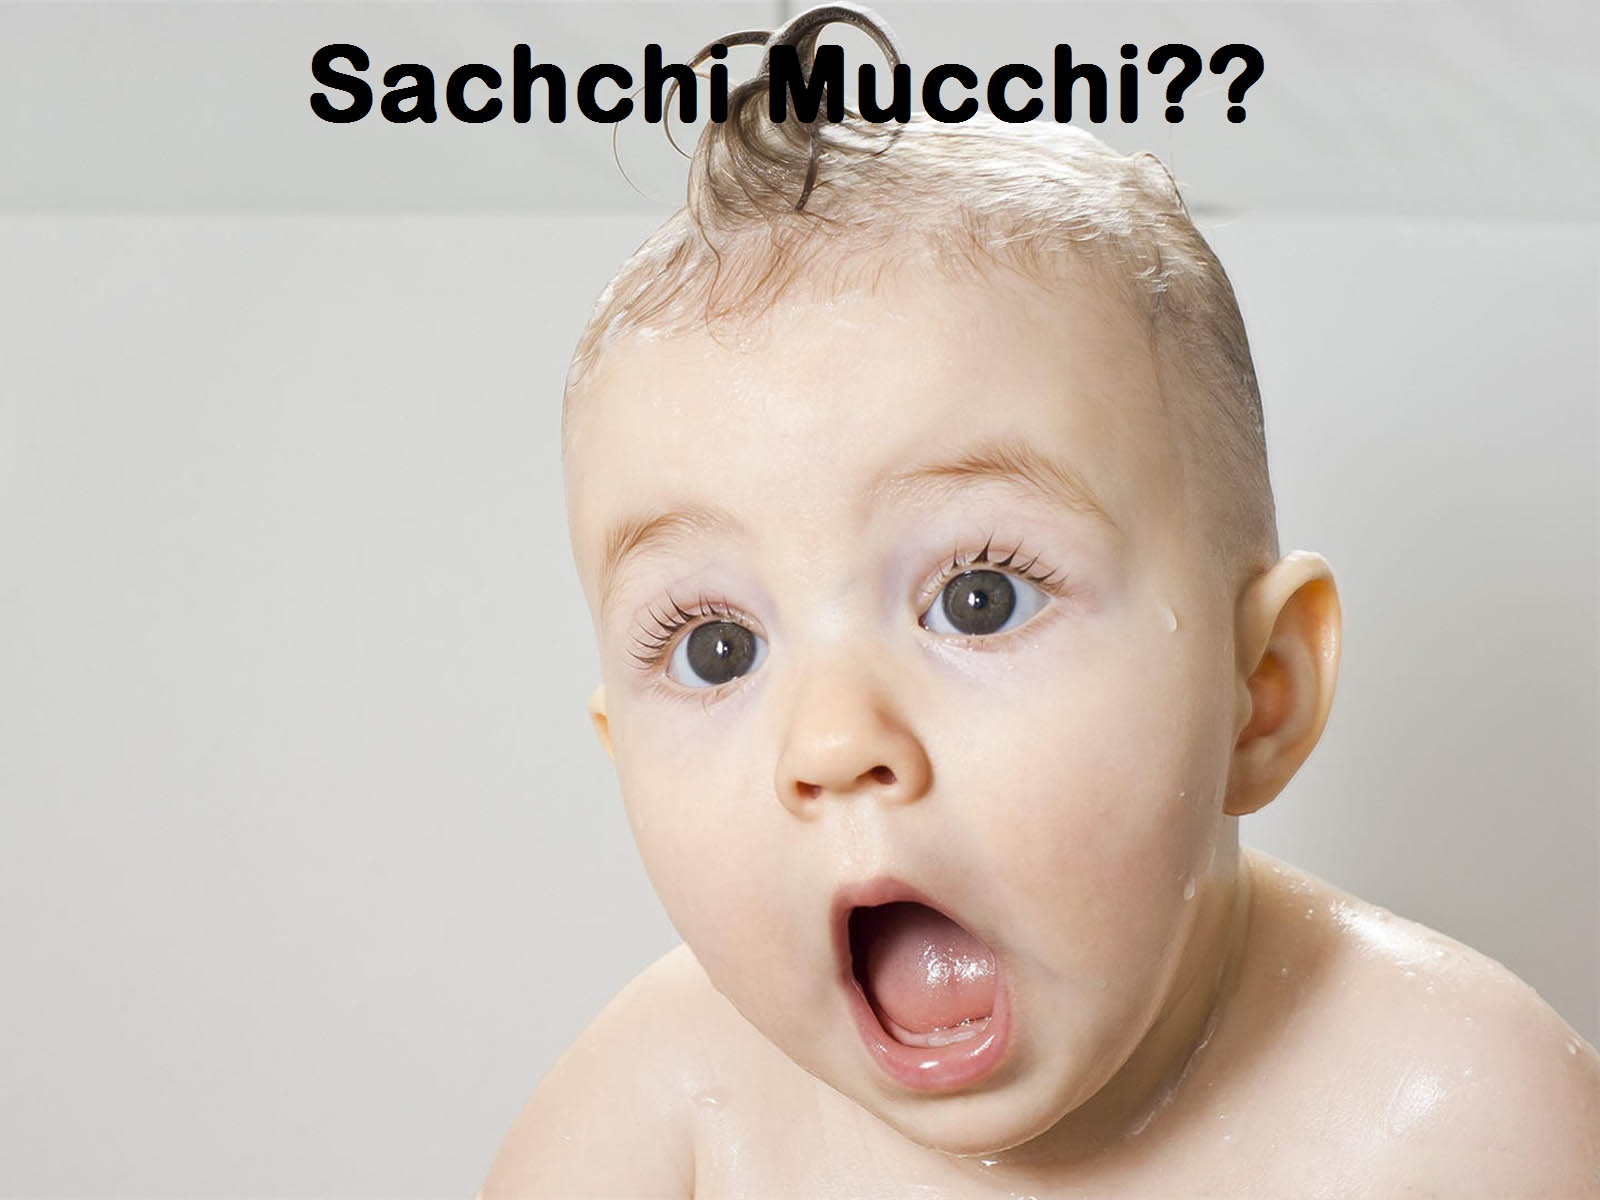 Sachchi Muchchi - Funny Baby  - Hindi Photo Comments  Search Engine - Find Photos to Comment in Facebook, Google+, Twitter,  Orkut, Hi5, Pinterest, WhatsApp, Viber, Line, Telegram